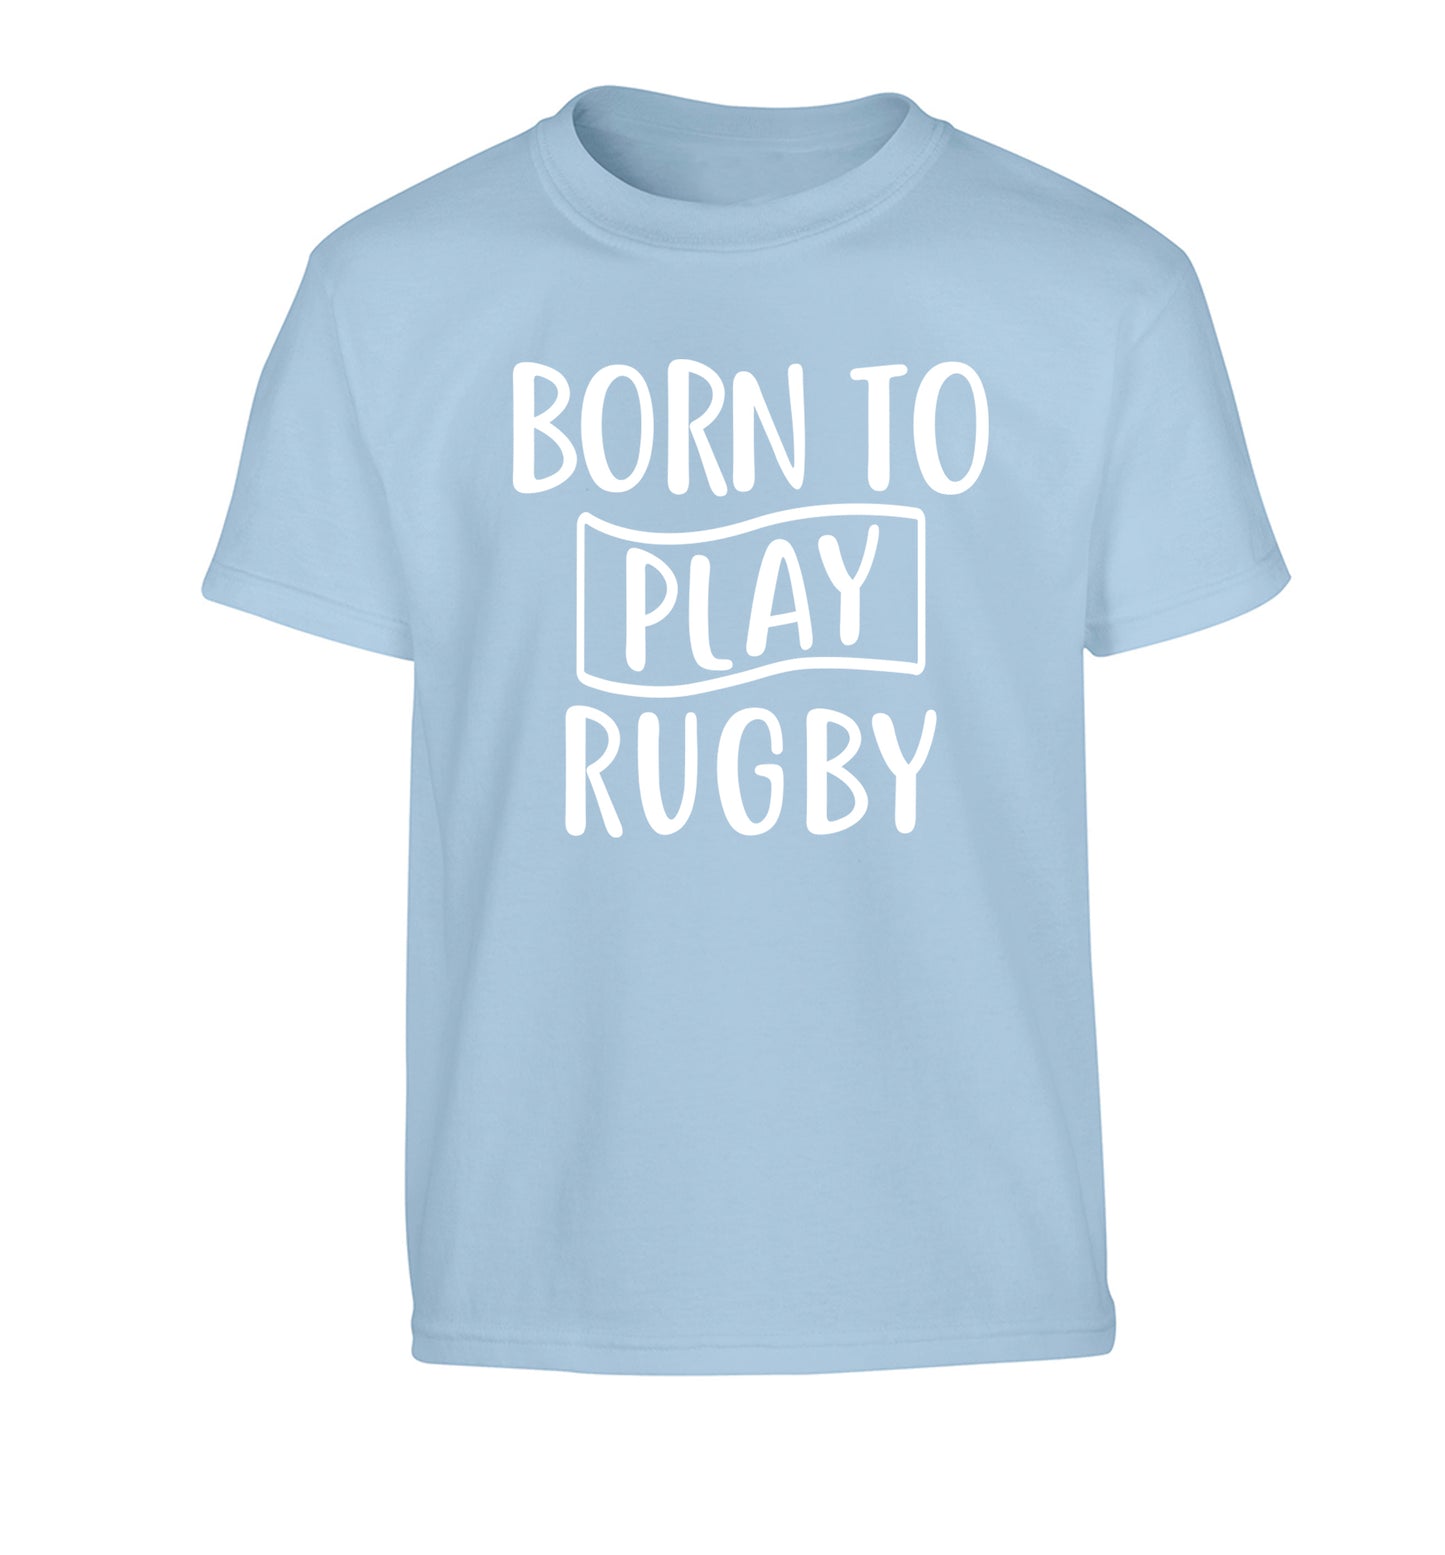 Born to play rugby Children's light blue Tshirt 12-13 Years